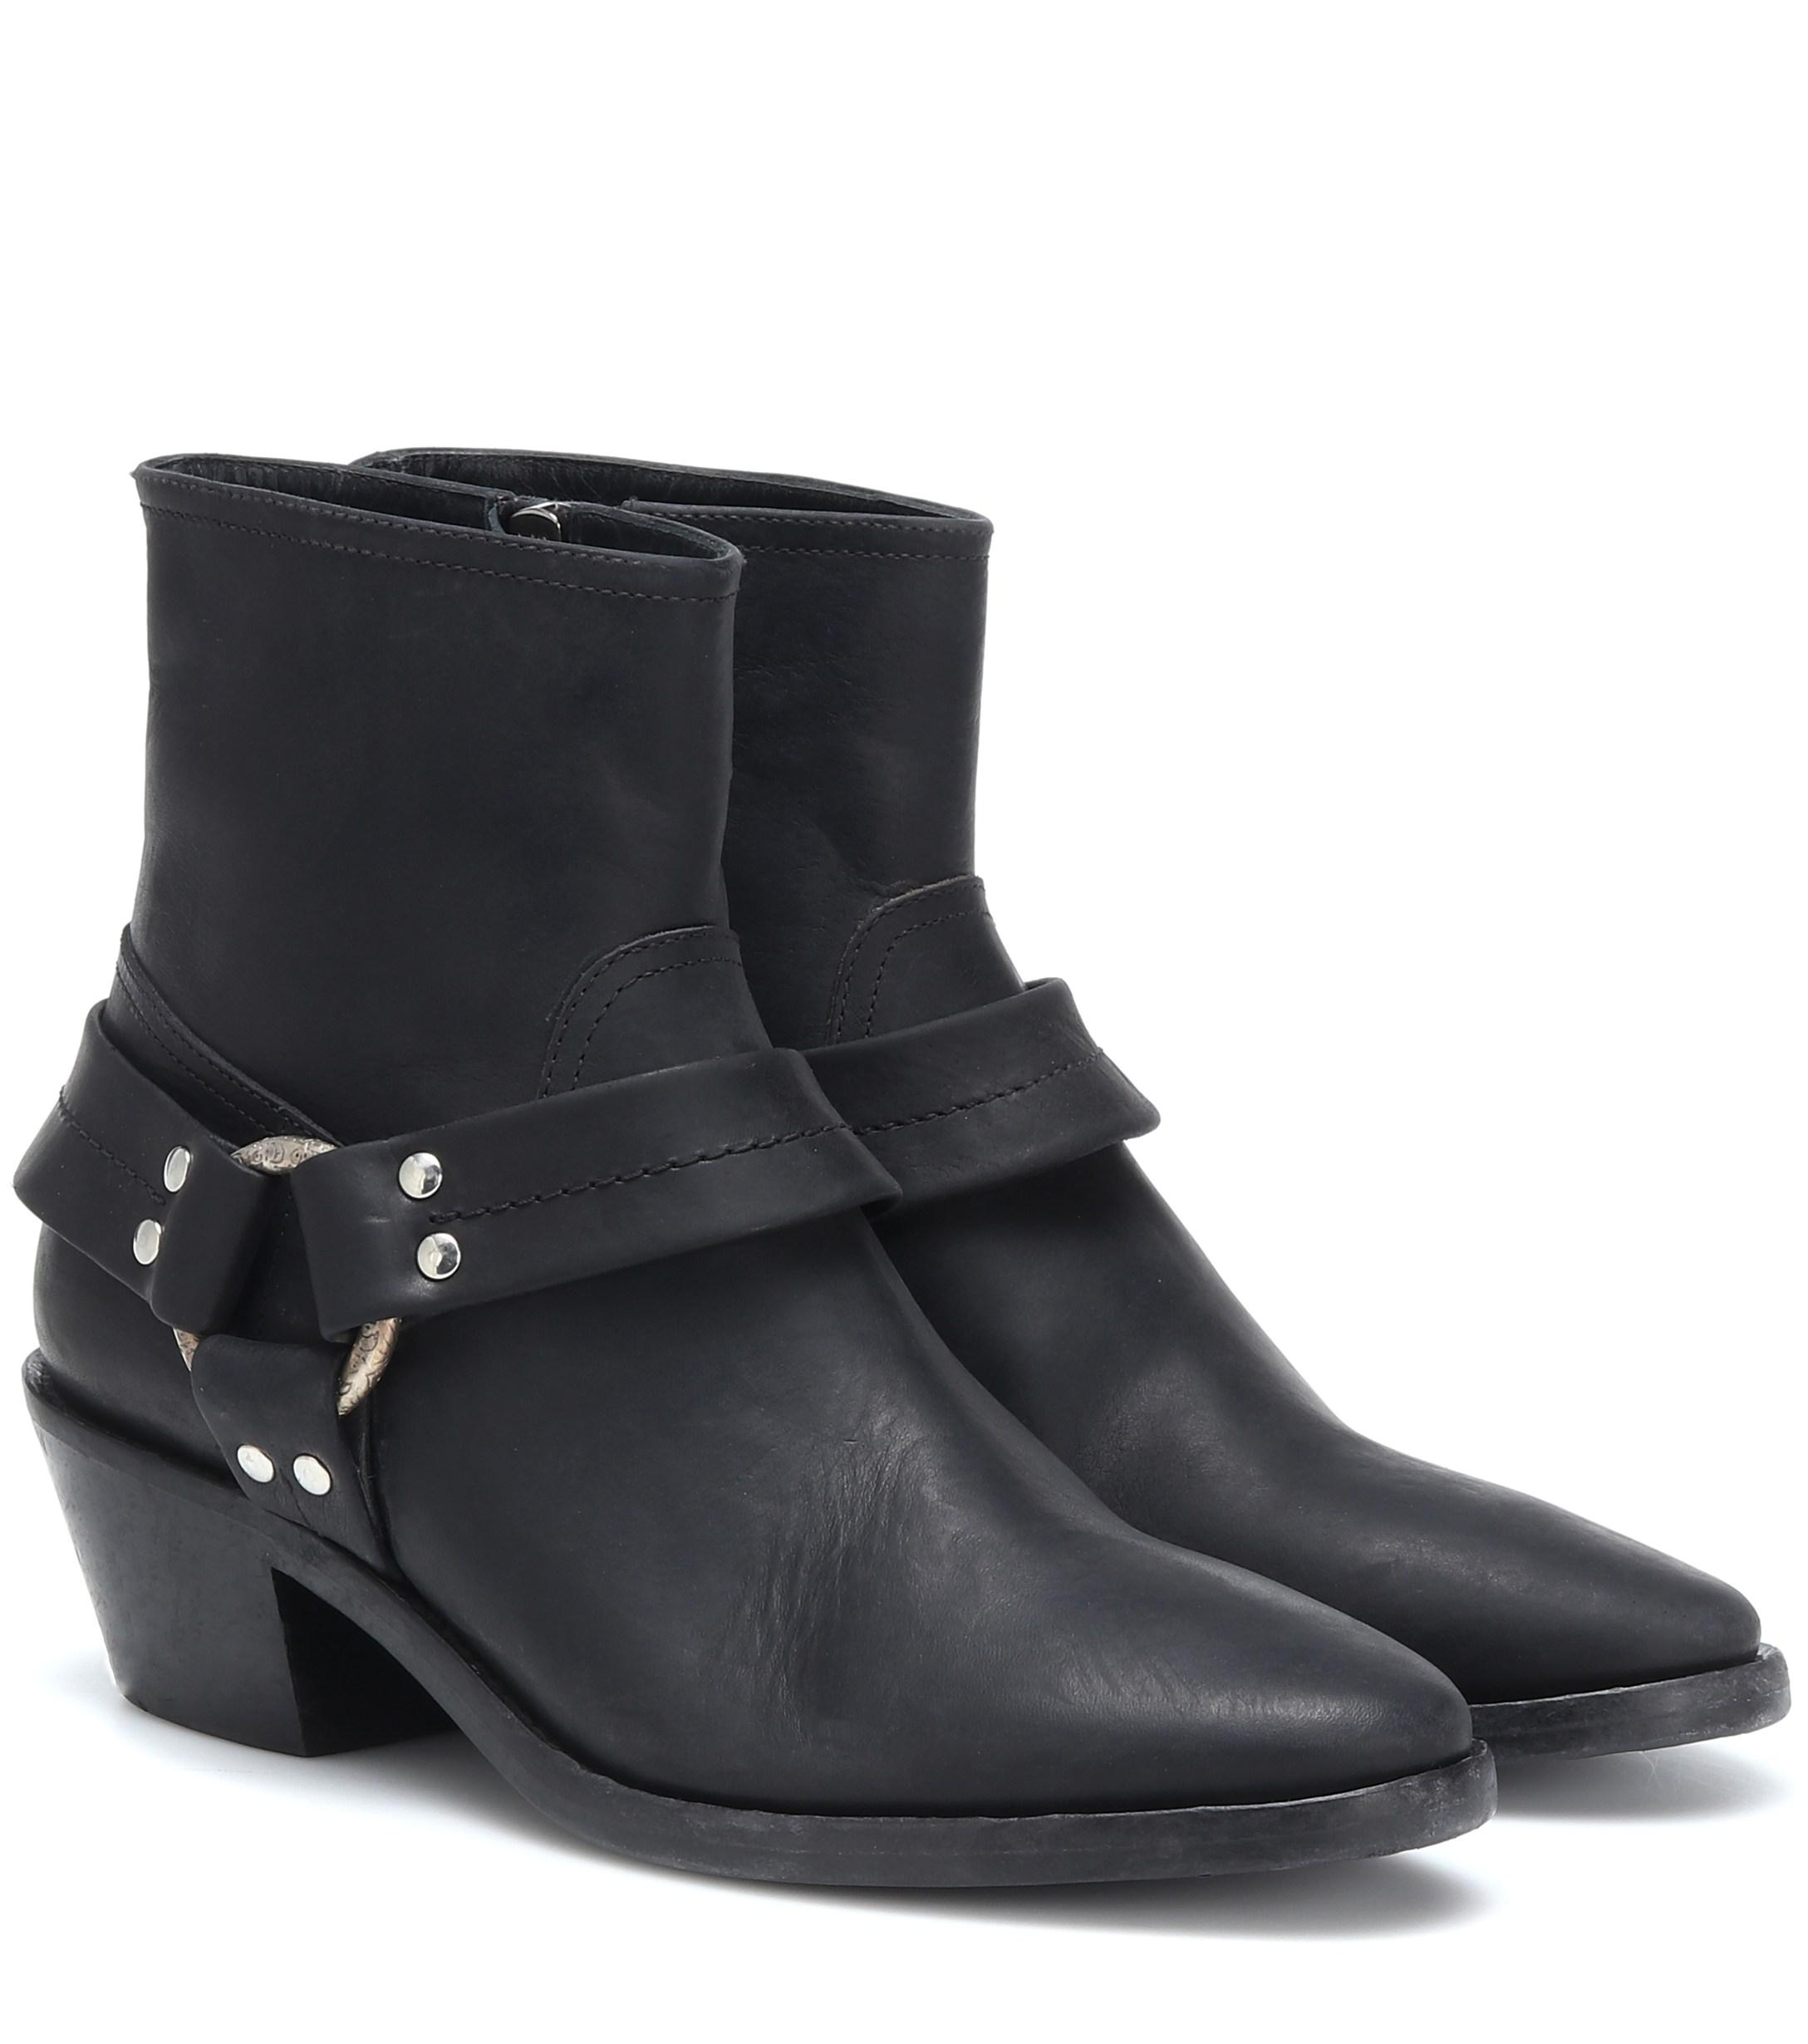 Golden Goose Deluxe Brand Leather Western Boots in Black - Save 44% - Lyst